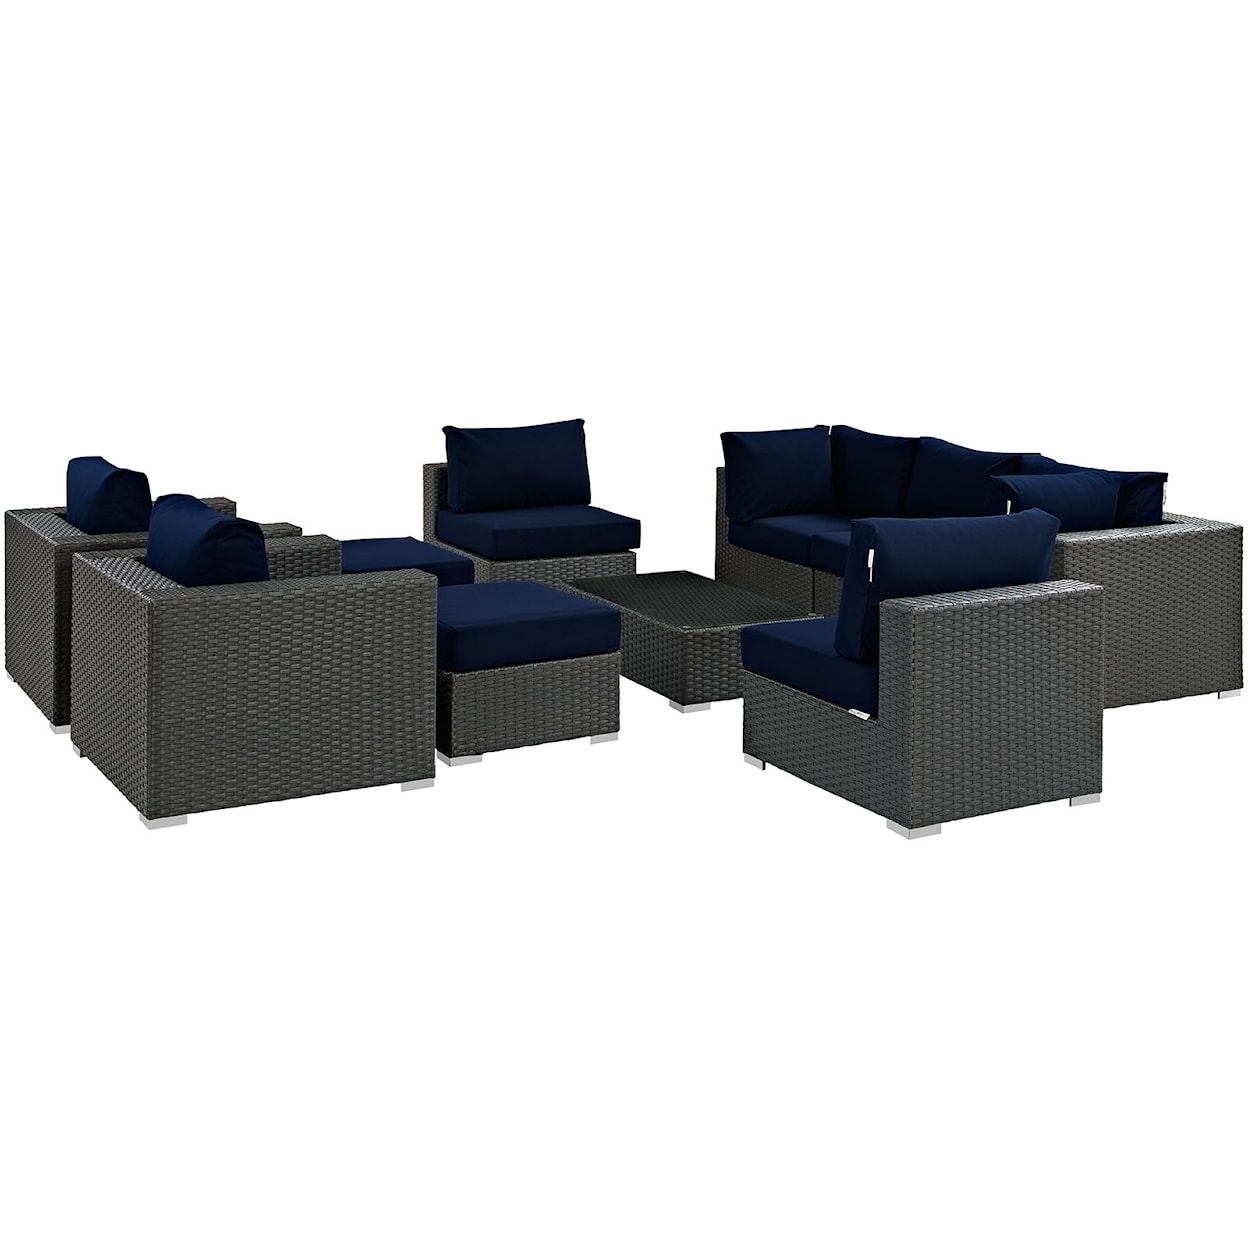 Modway Sojourn Outdoor 10 Piece Sectional Set